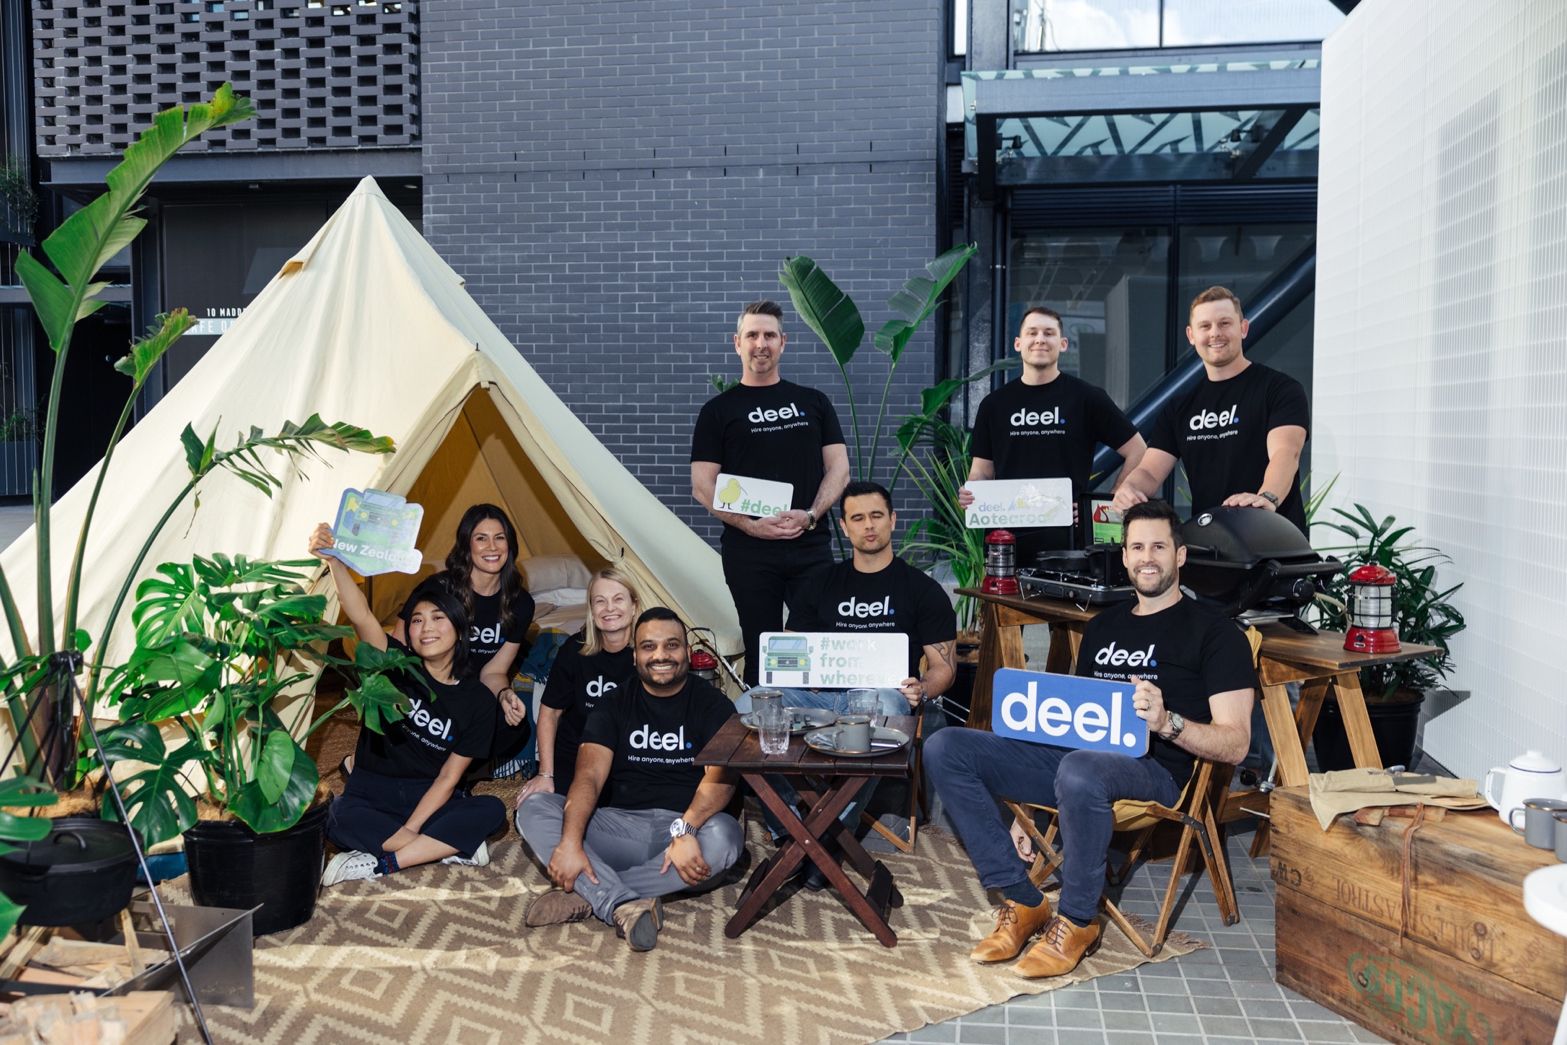 Deel staff celebrate at an outdoor space